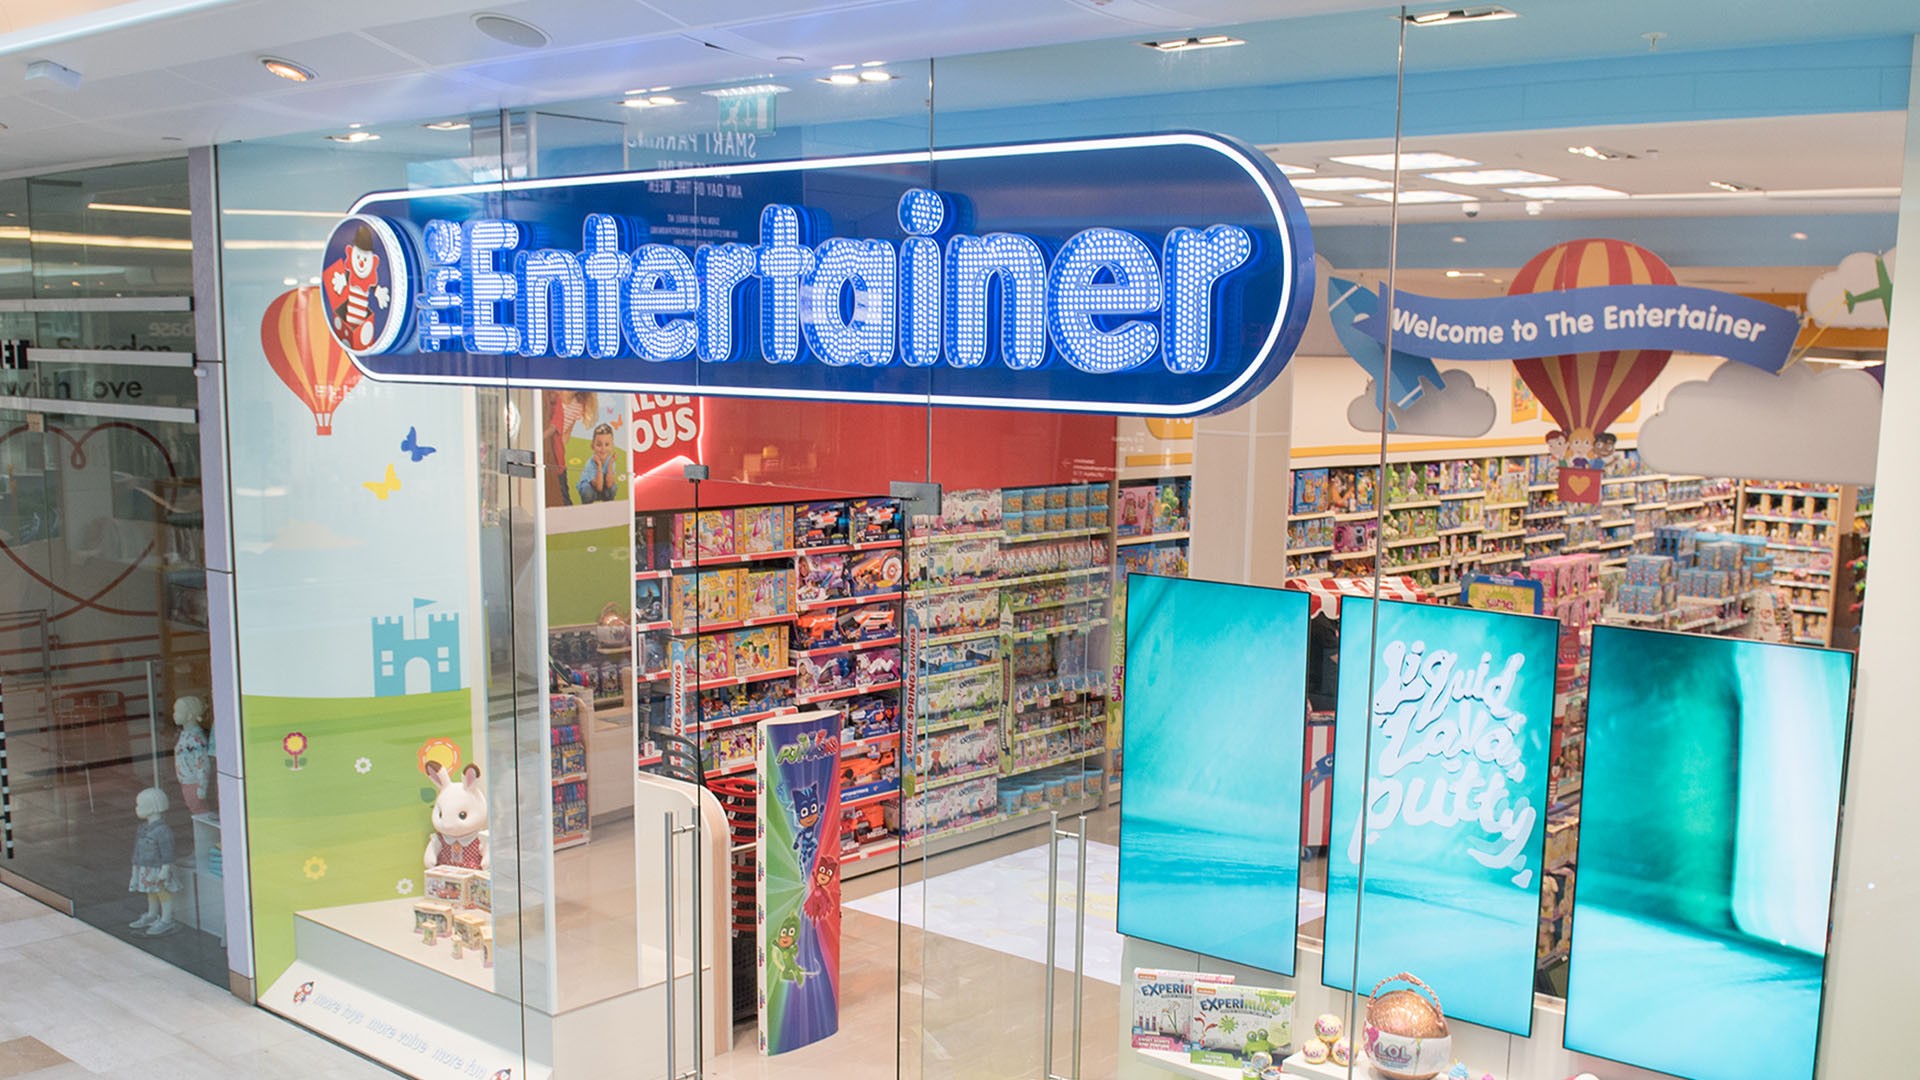 Image of an Entertainer store